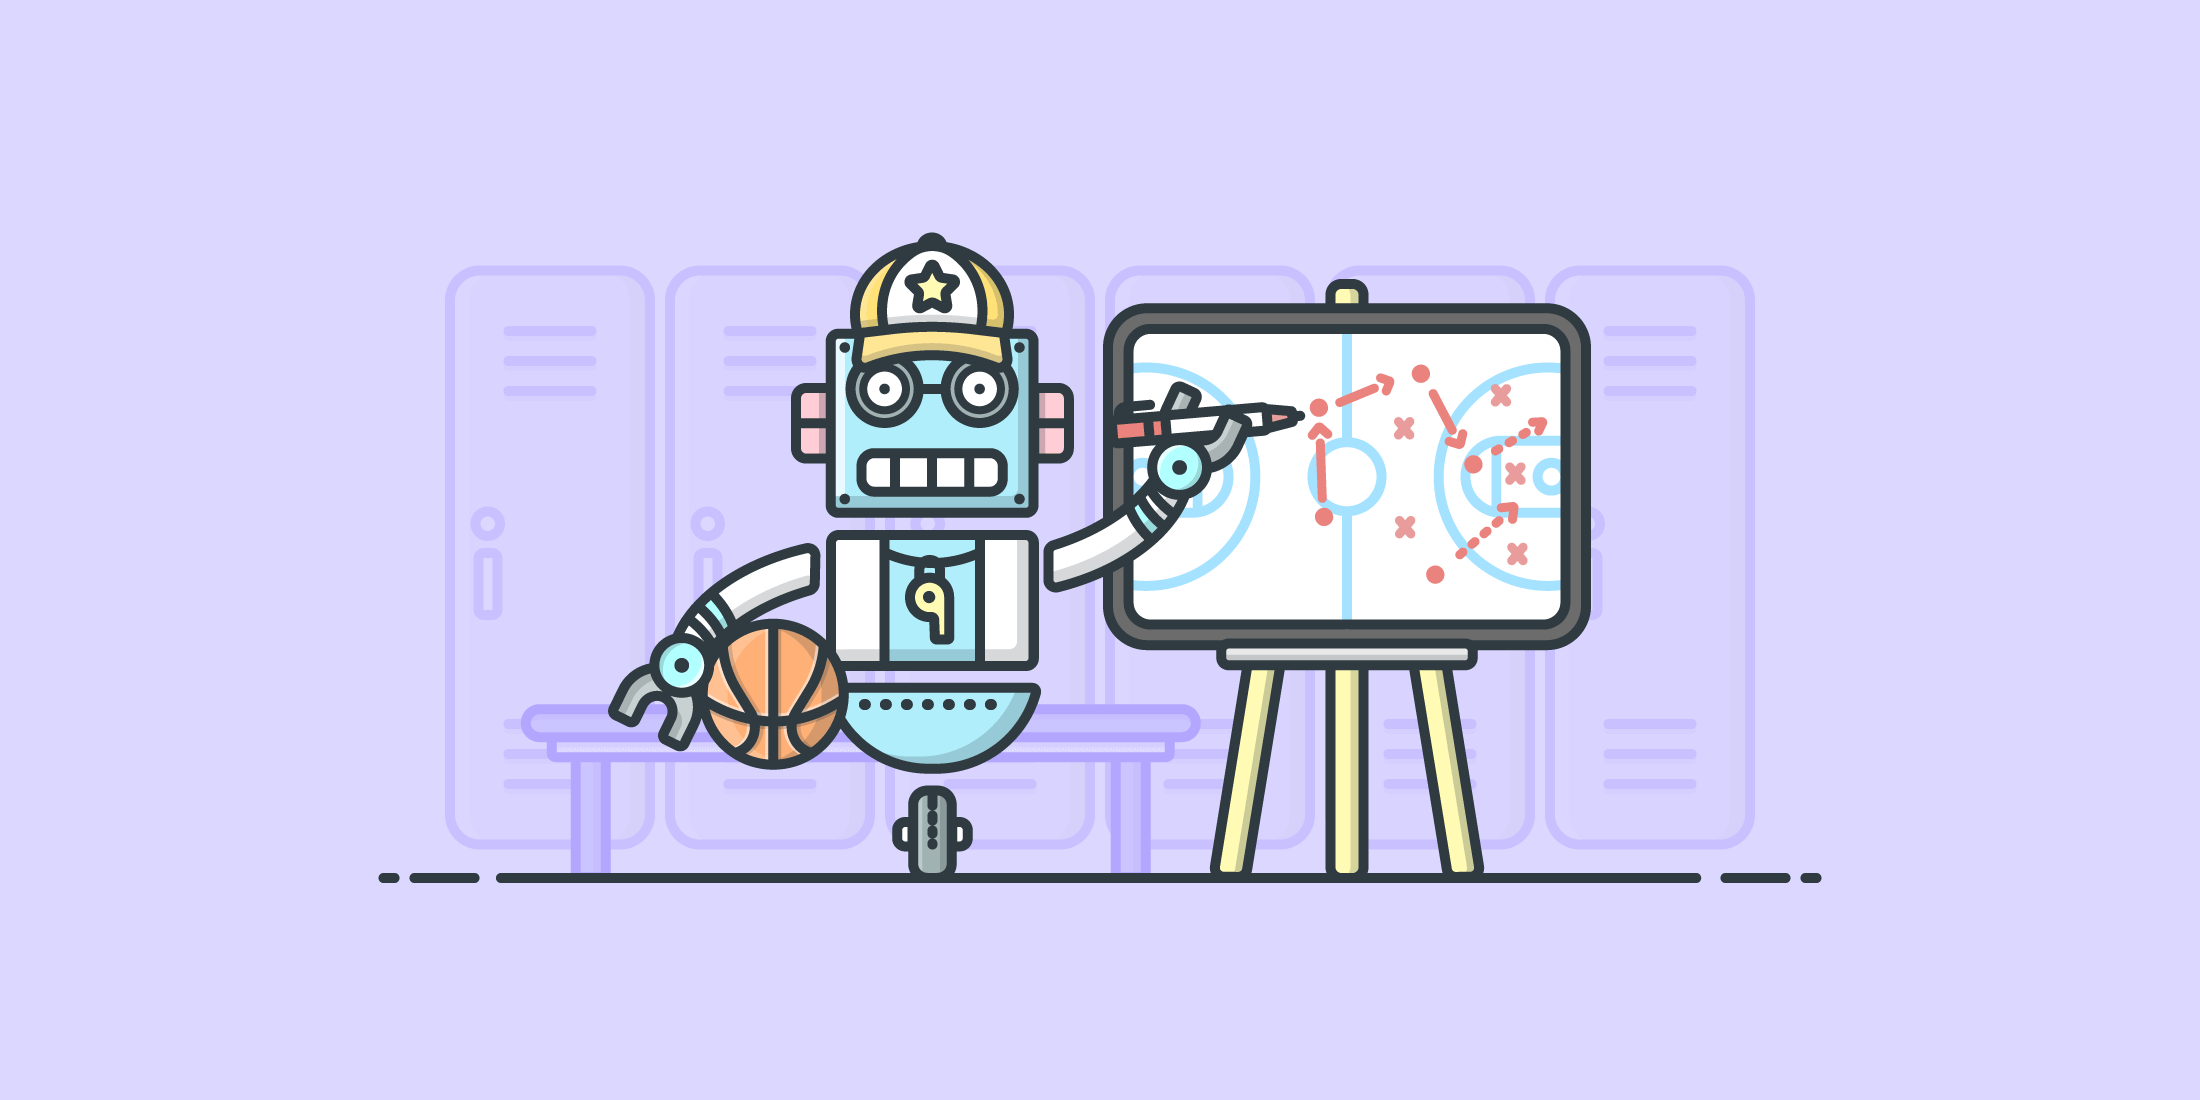 Illustration of a robot painting